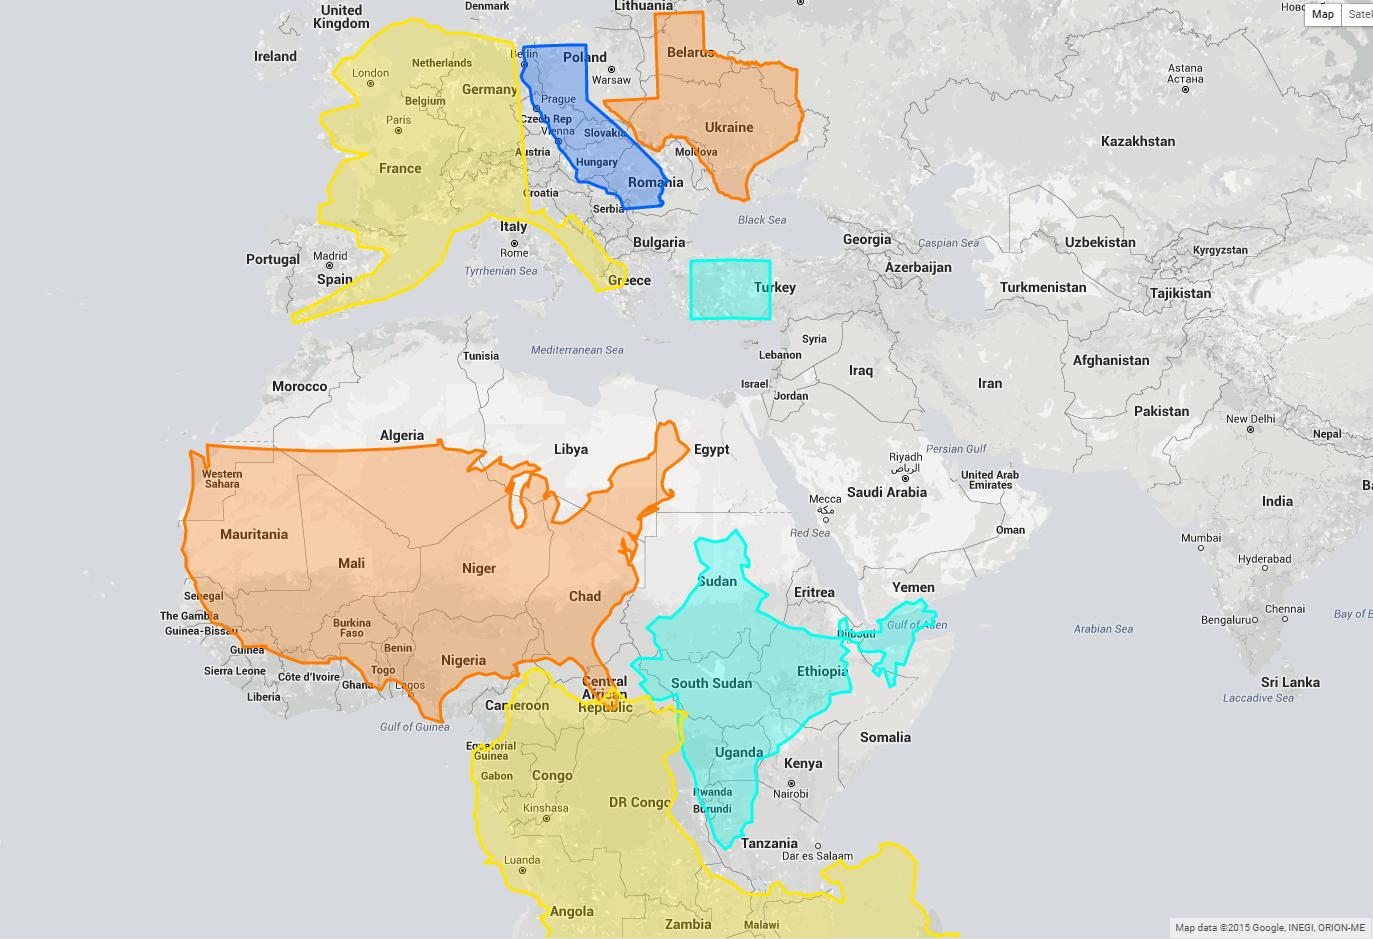 the good word groundswell: 'True Size Map' Proves You've Been Picturing